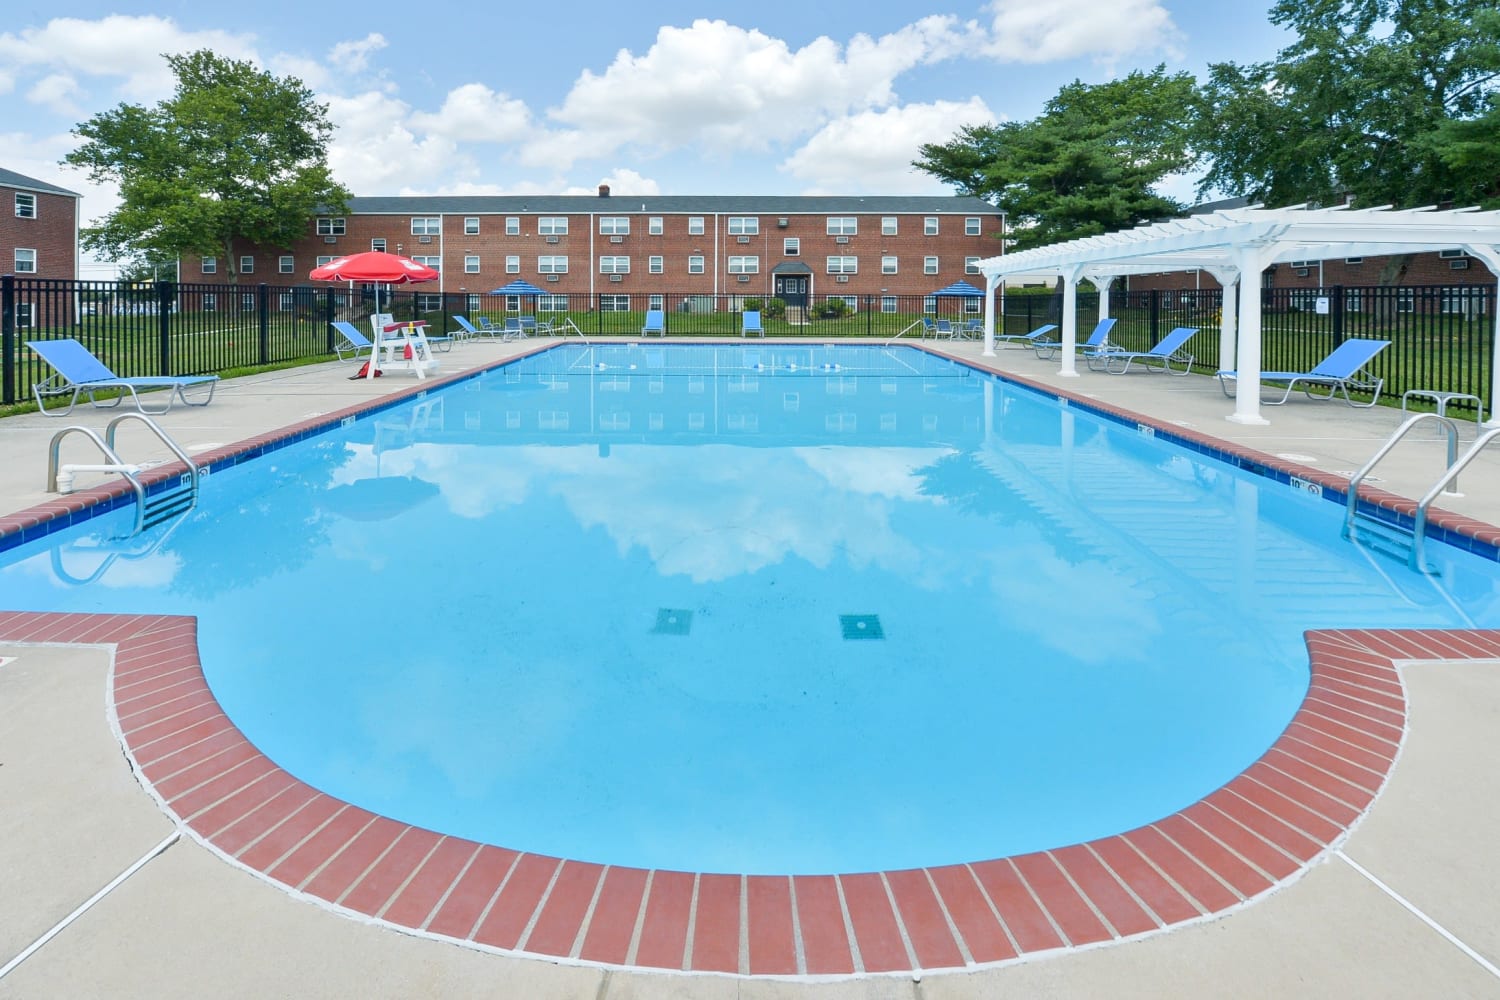 Swimming pool at Hyde Park Apartment Homes in Bellmawr, New Jersey